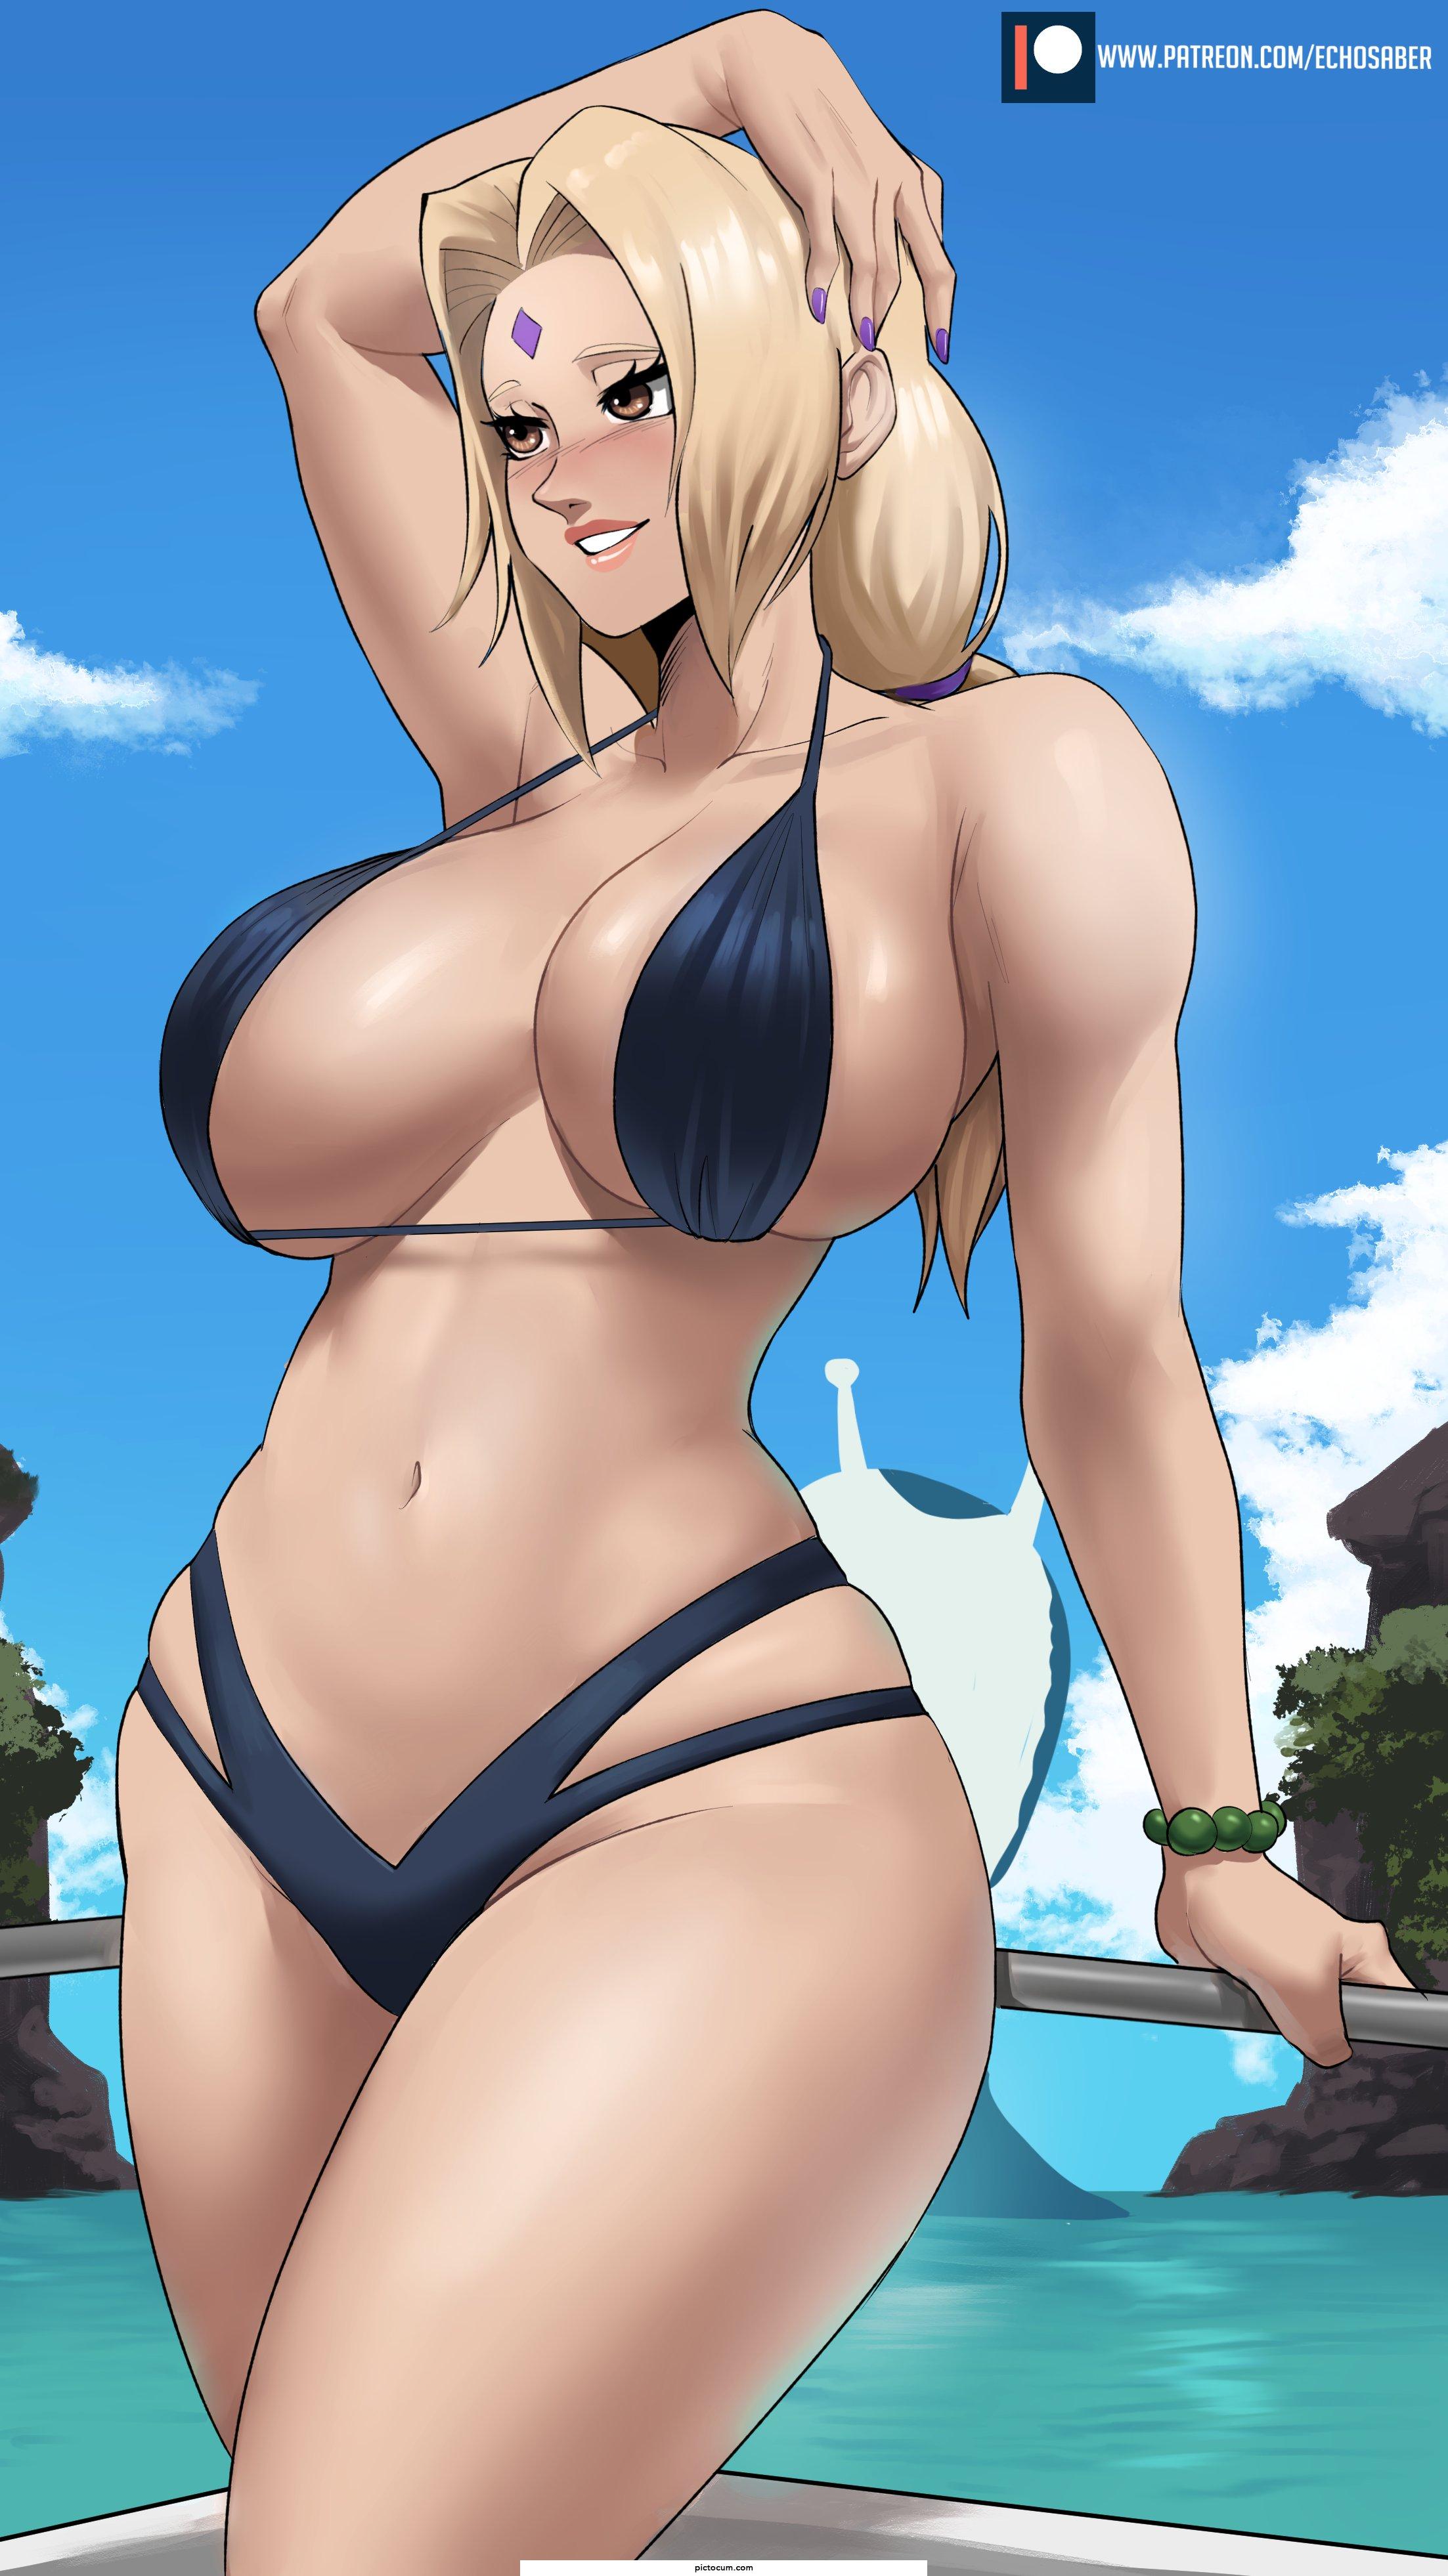 Tsunade showing her curves